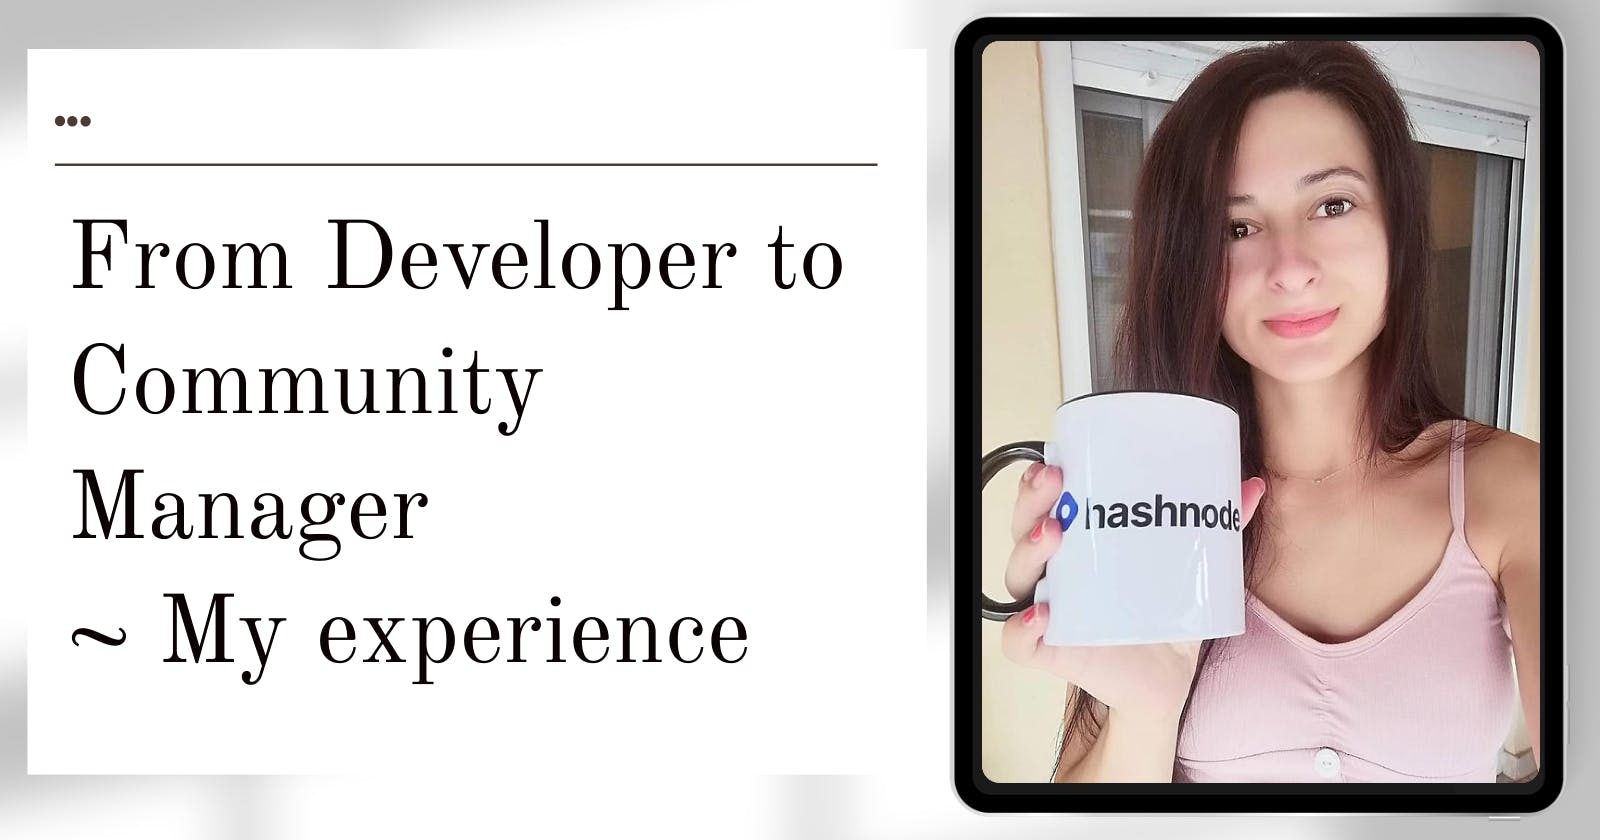 1 Year Anniversary at Hashnode as a Community Manager & Answering Questions from the Community 💙